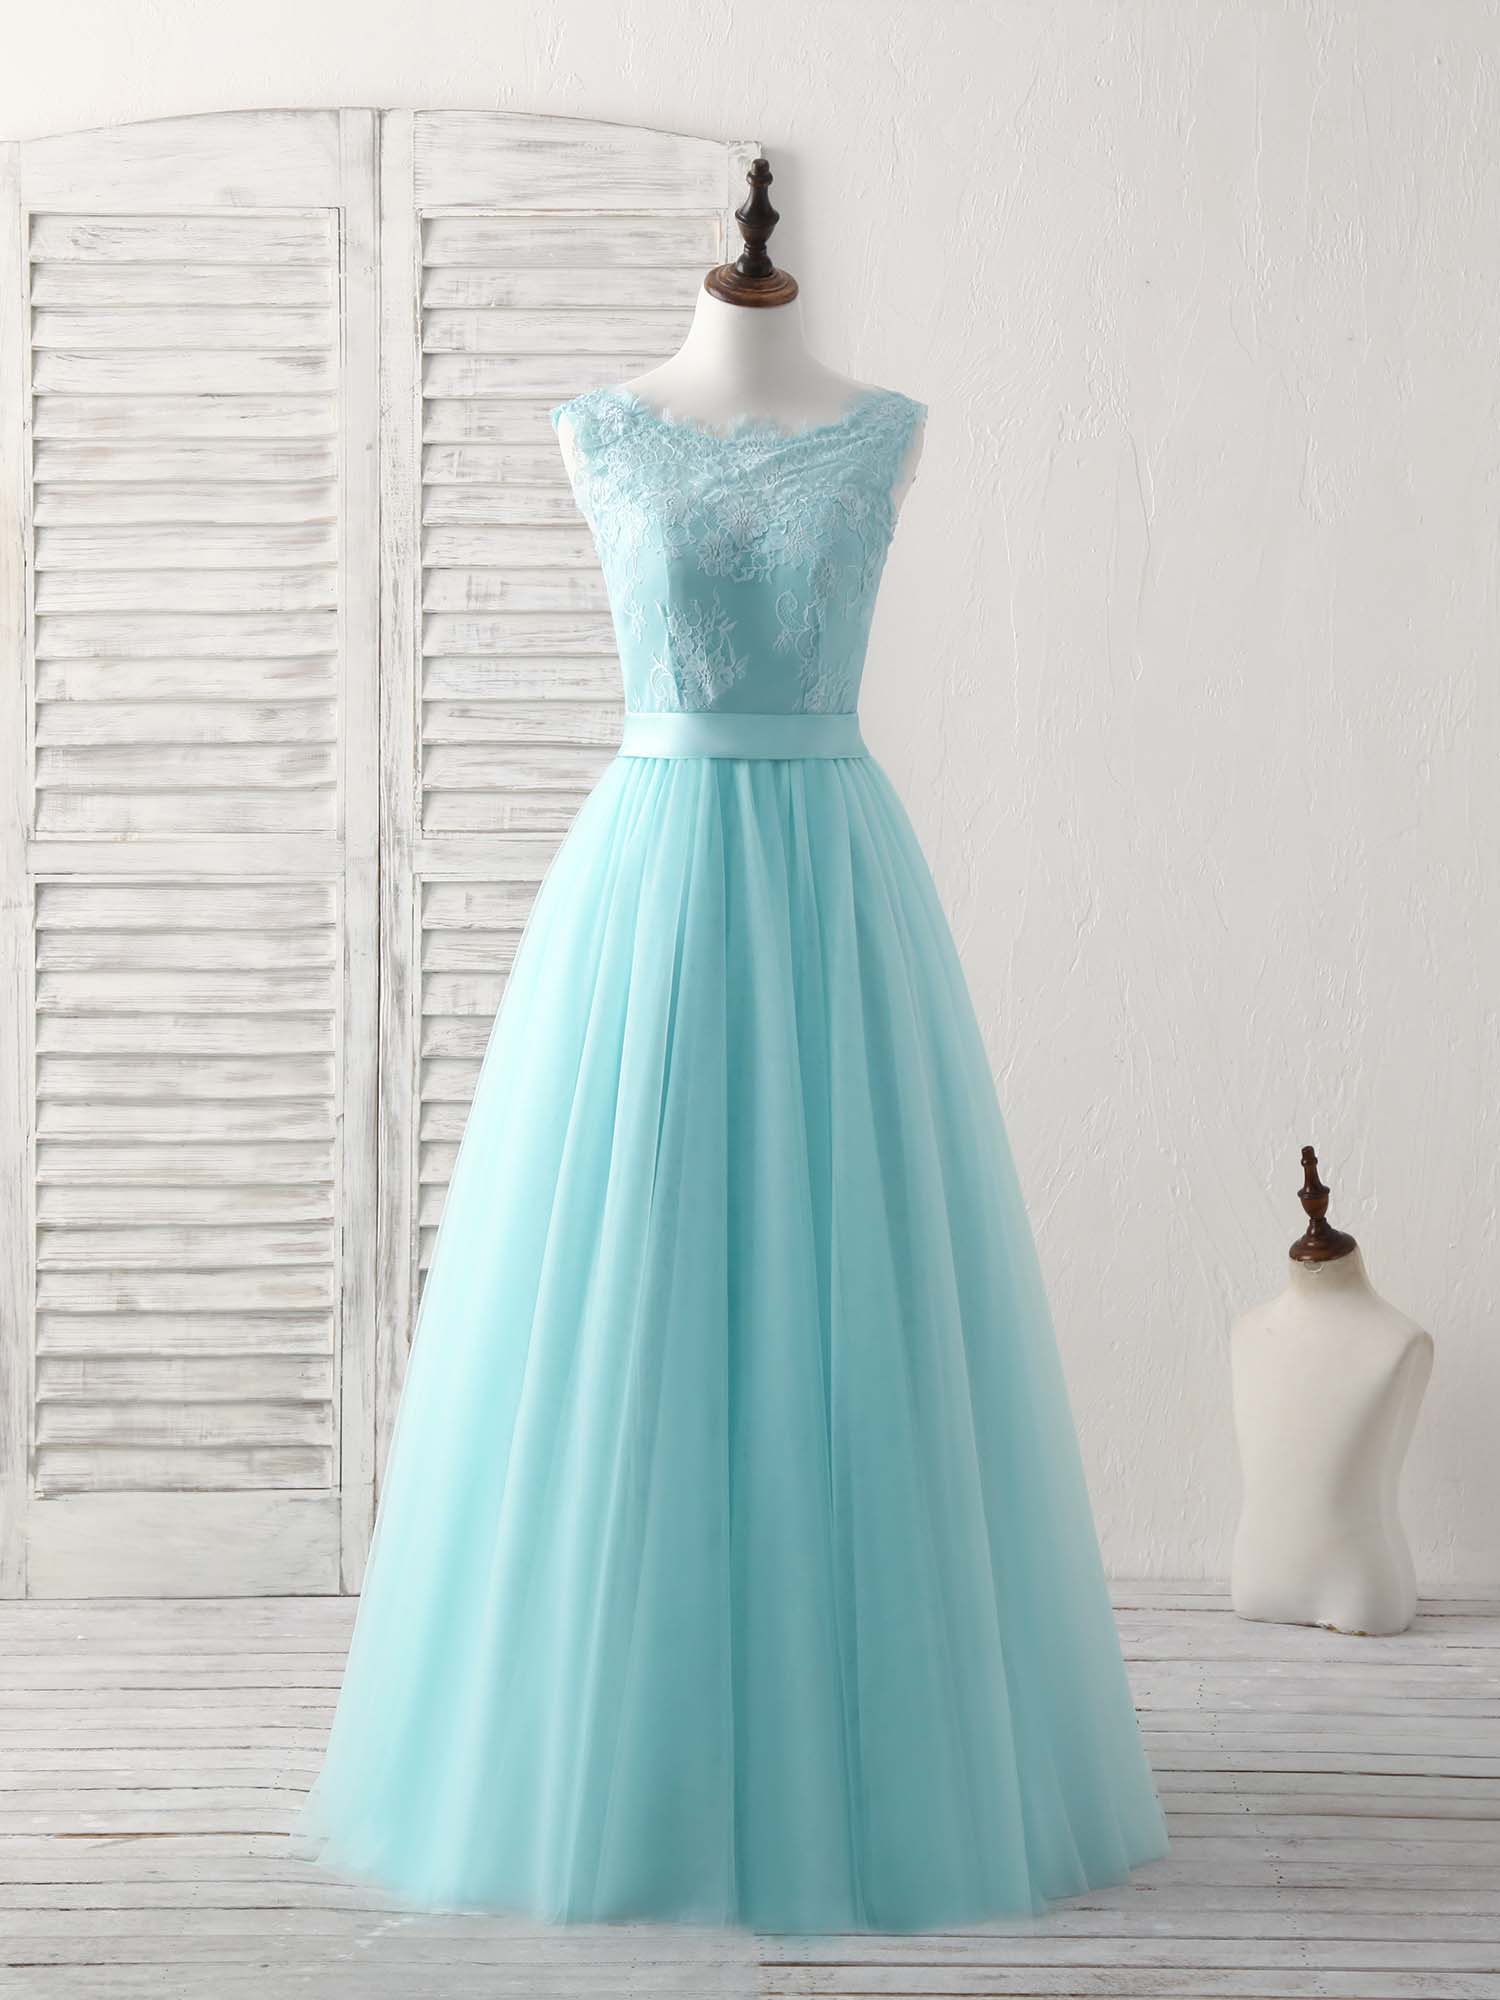 Green Round Neck Lace Tulle Long Prom Dress Outfits For Girls, Evening Dress